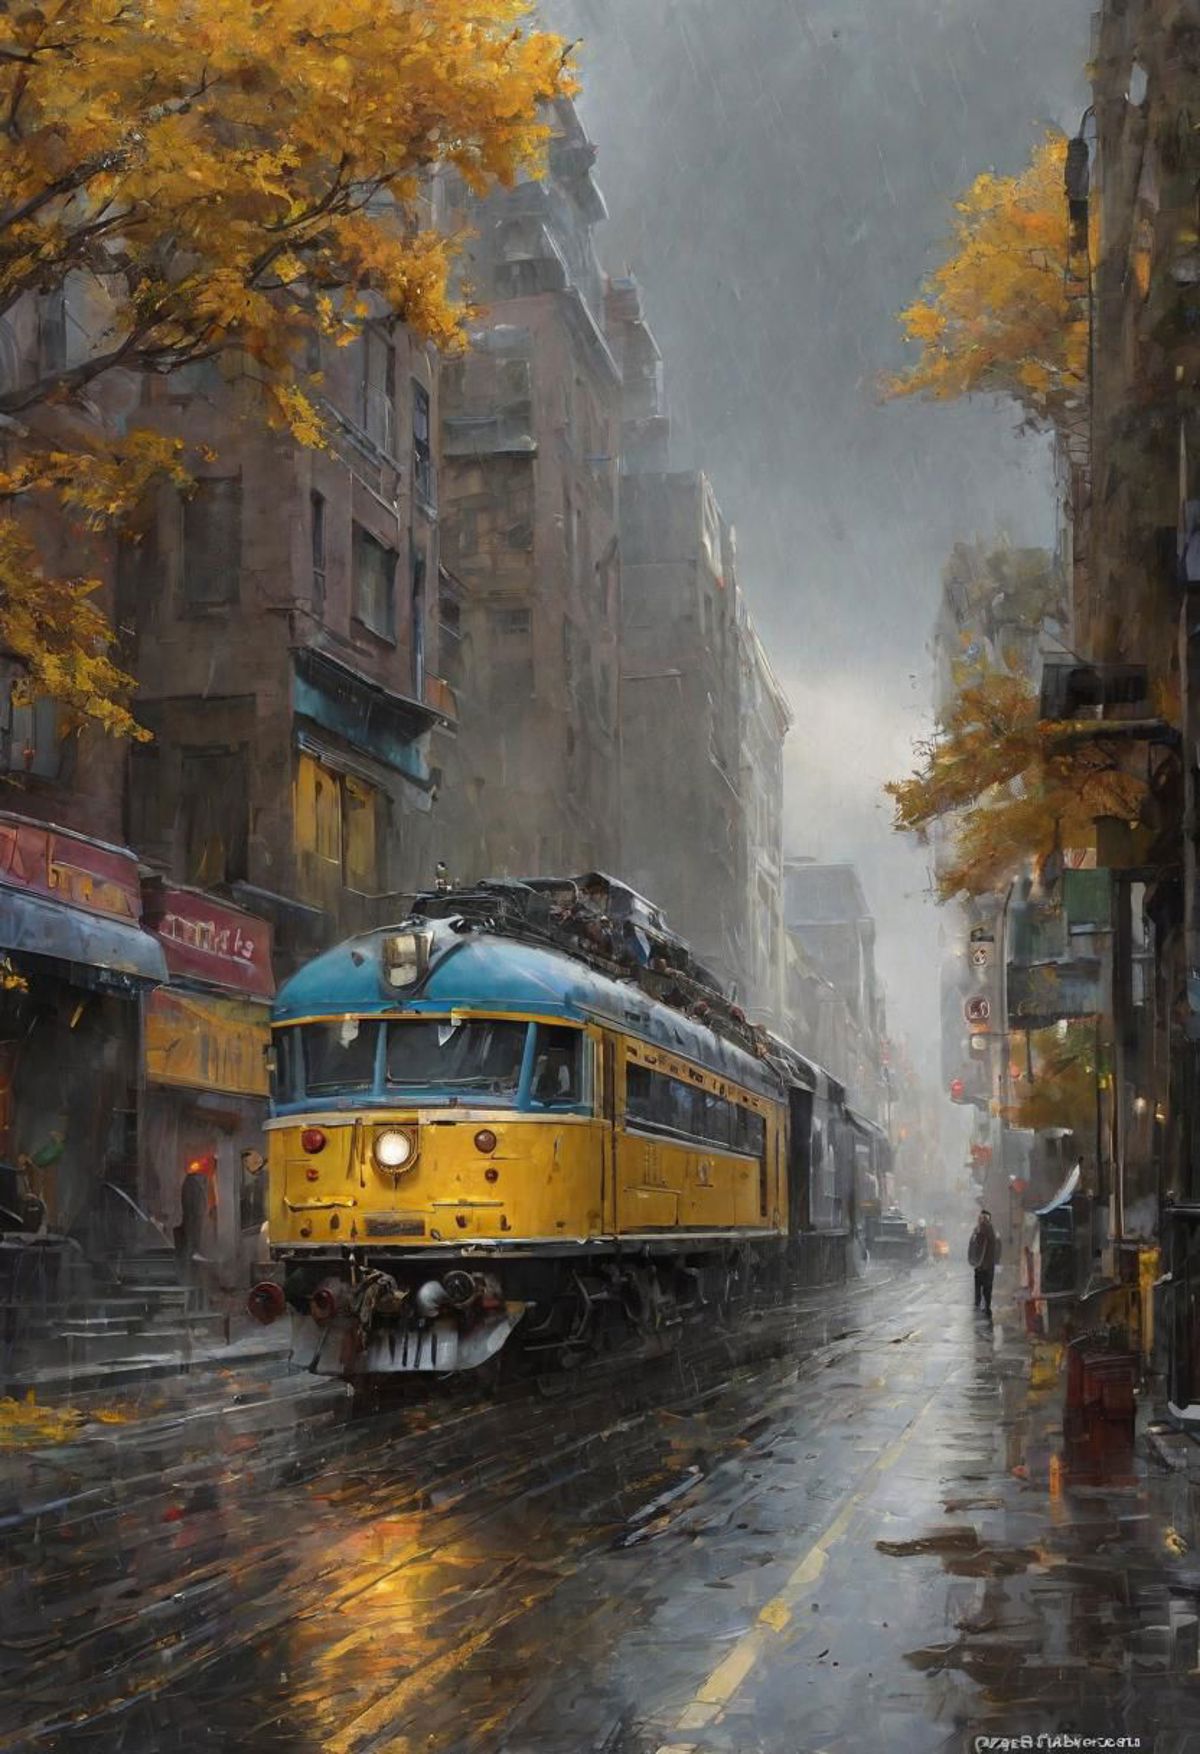 A yellow and blue train traveling through a city with wet streets.